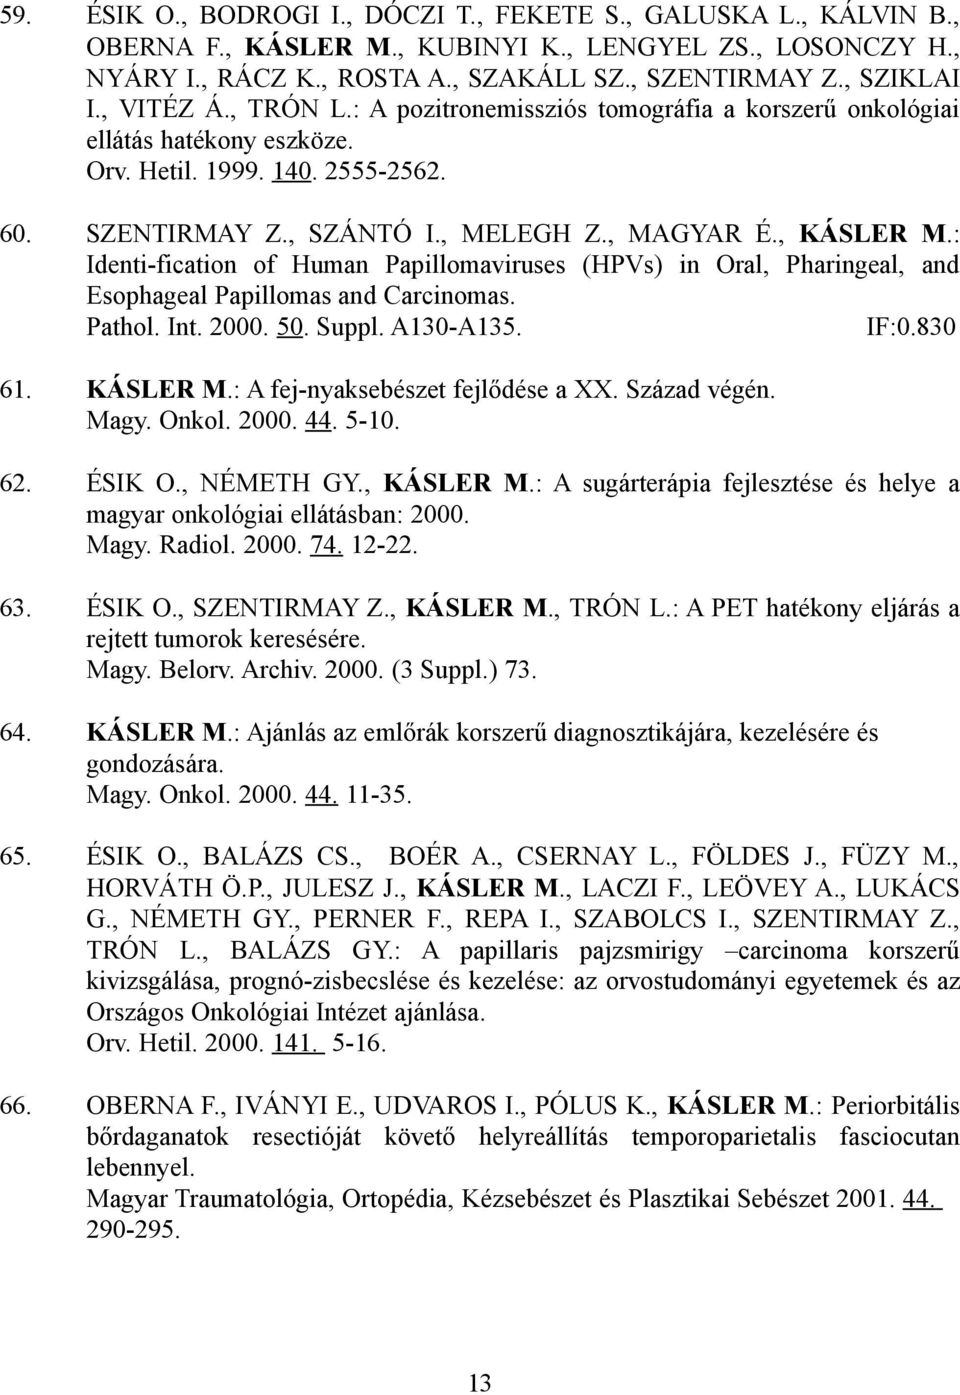 : Identi-fication of Human Papillomaviruses (HPVs) in Oral, Pharingeal, and Esophageal Papillomas and Carcinomas. Pathol. Int. 2000. 50. Suppl. A130-A135. IF:0.830 61. KÁSLER M.